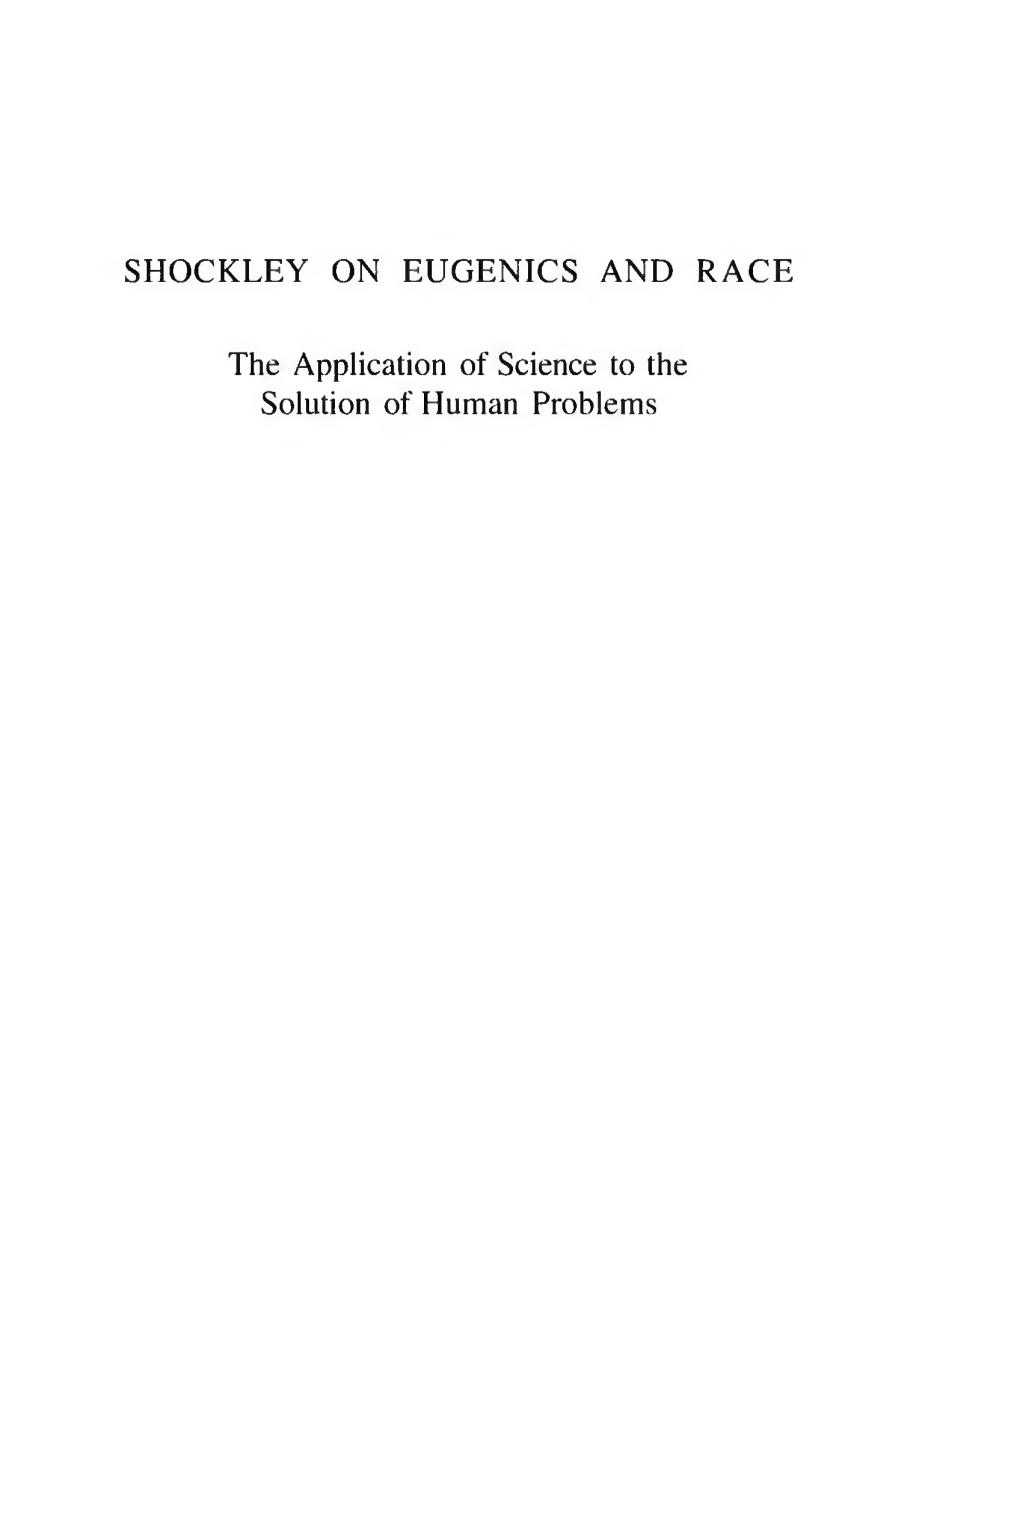 SHOCKLEY on EUGENICS and RACE the Application